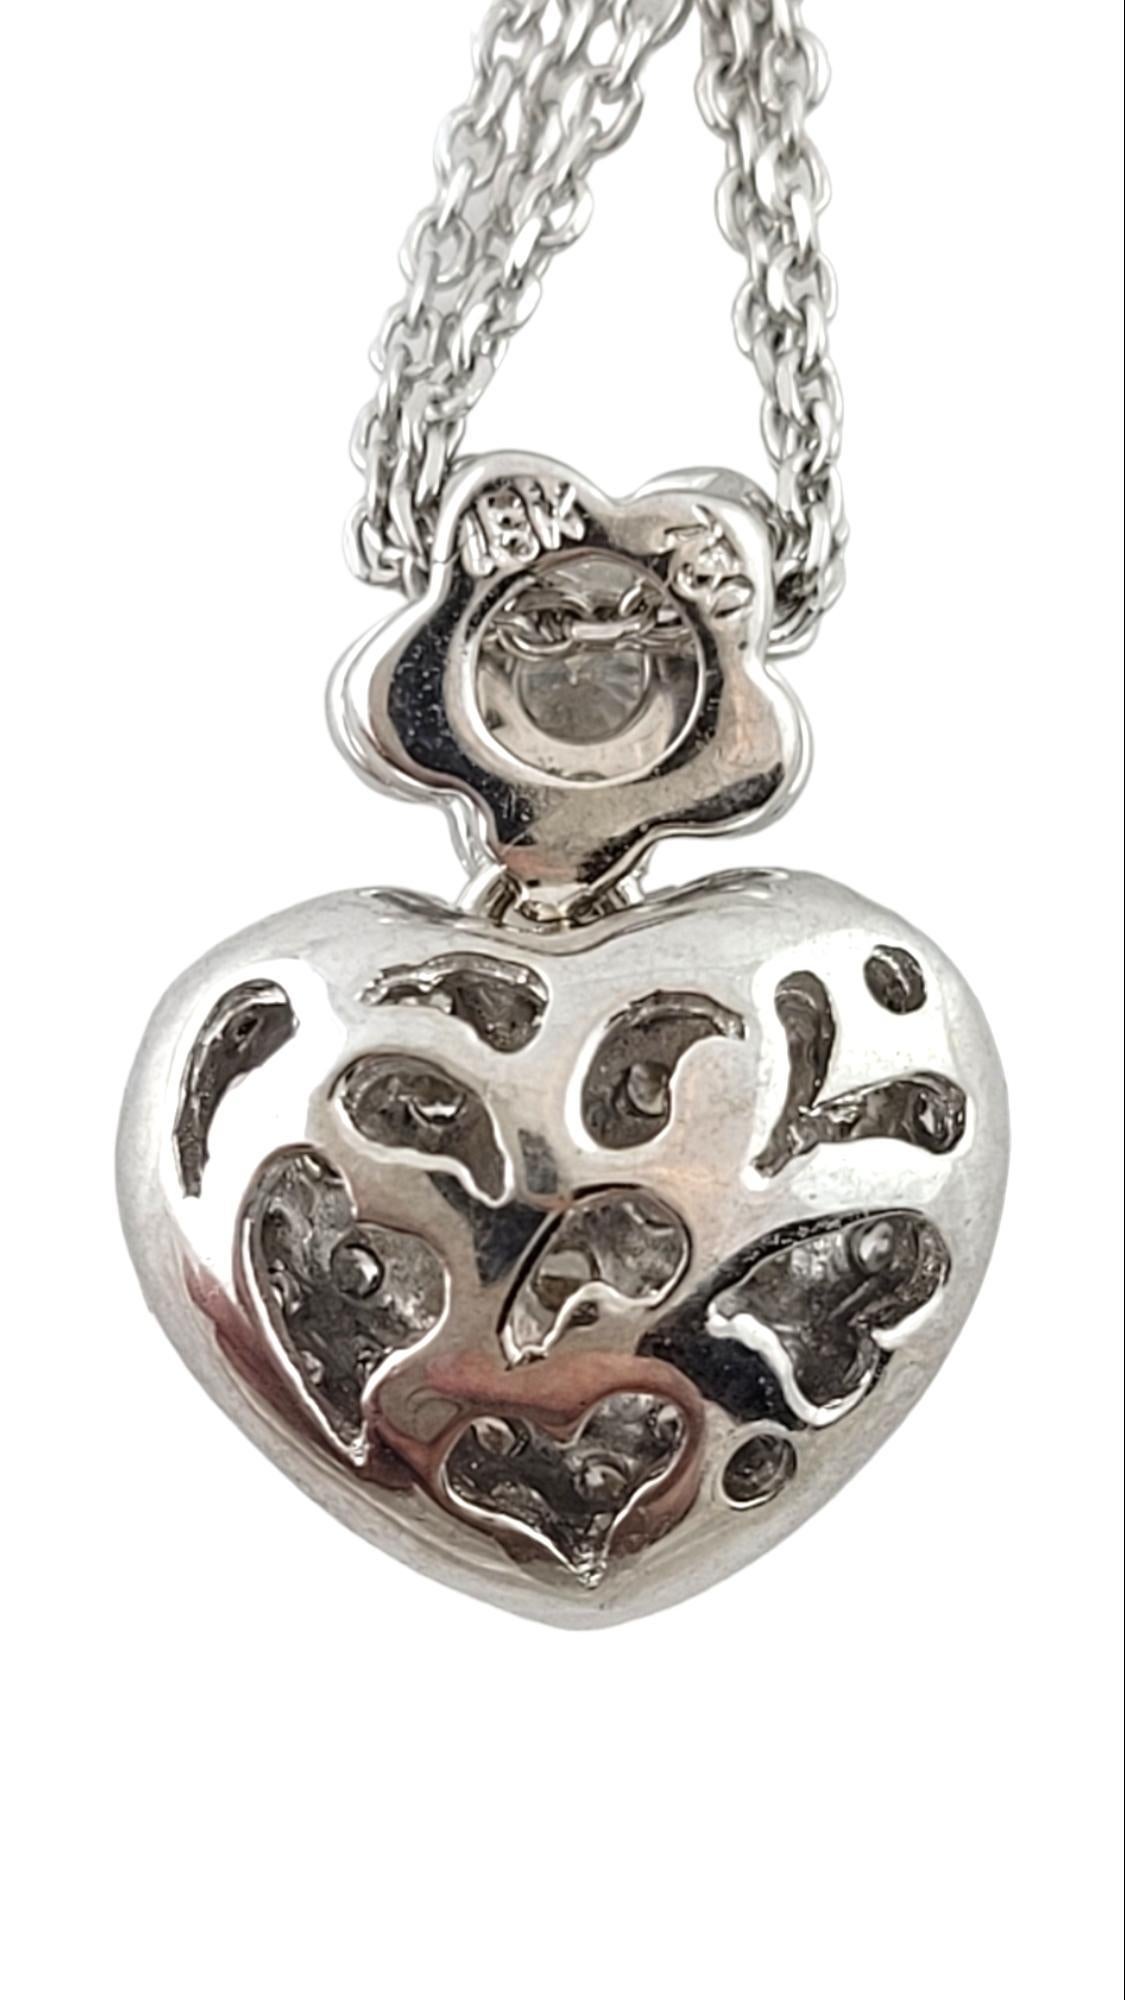 18K White Gold Diamond Heart Pendant w/ 14K White Gold Chain #15930 In Good Condition For Sale In Washington Depot, CT